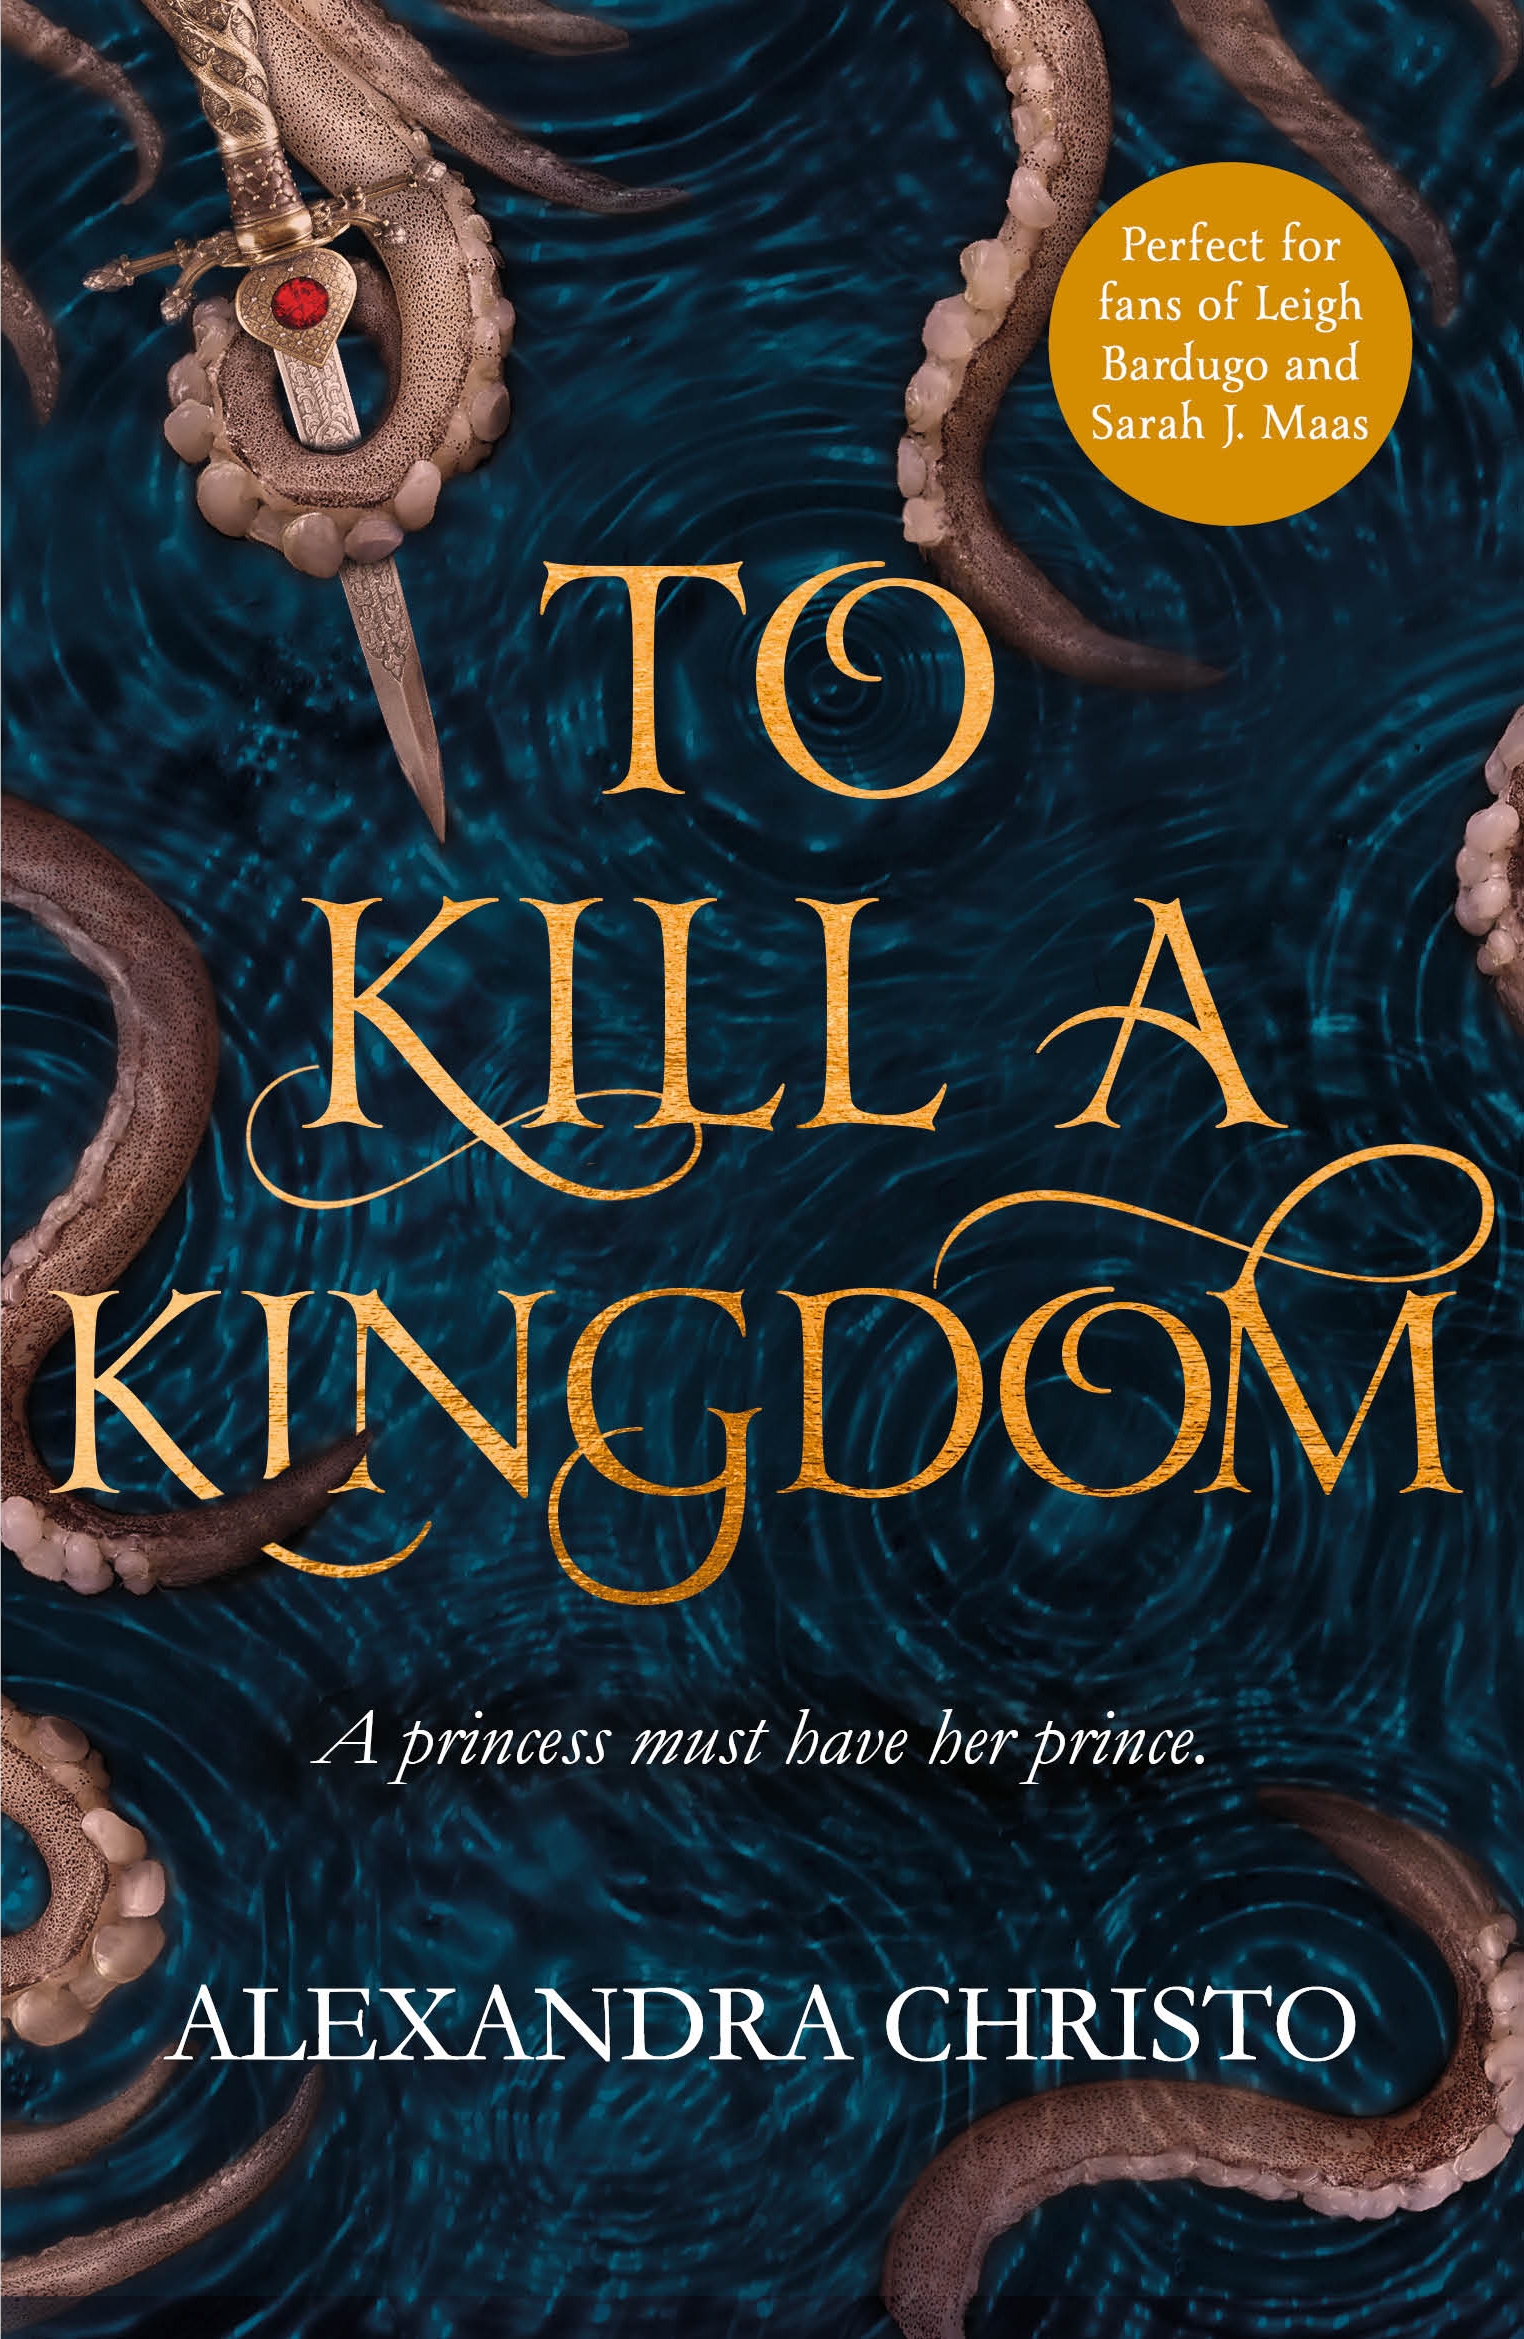 Photo of Review: 'To Kill a Kingdom' is a Magical Debut